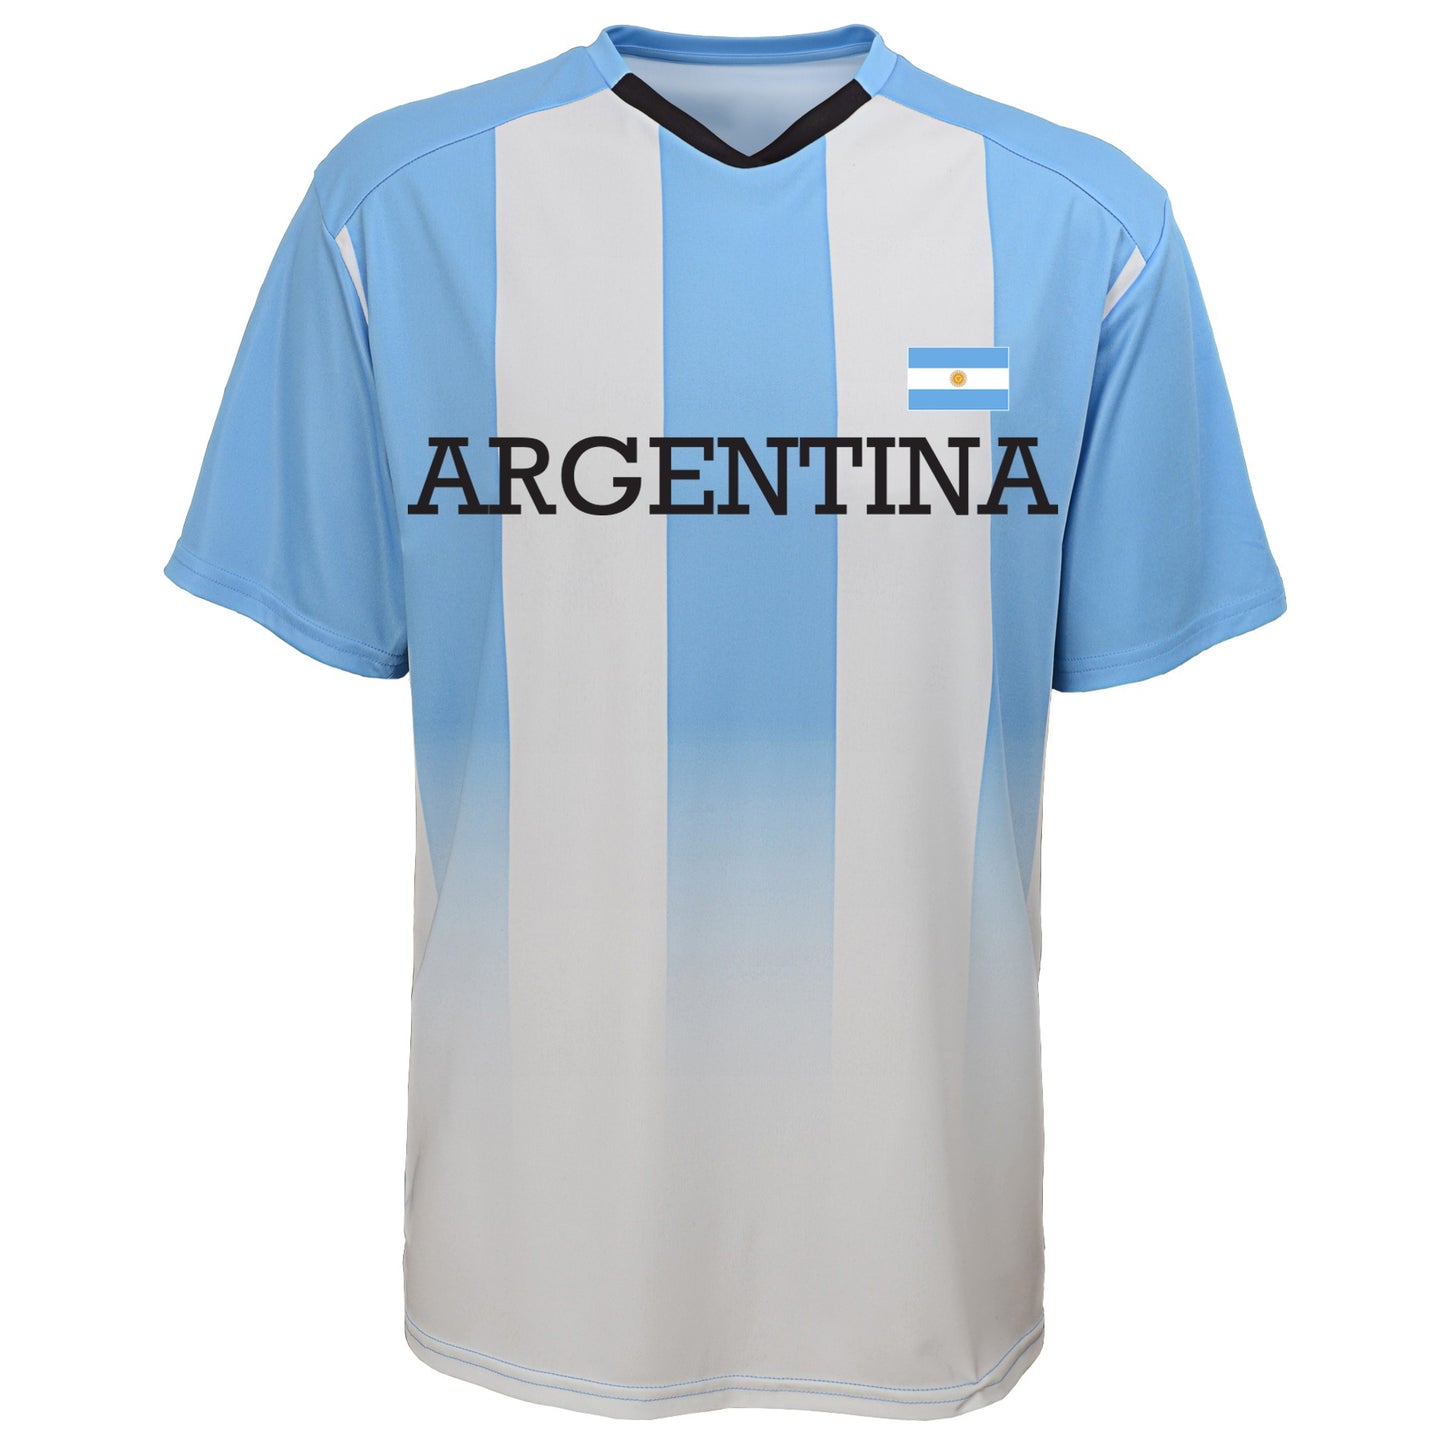 Youth Team Argentina Federation Soccer Jersey Shirt Performance Jersey Tee